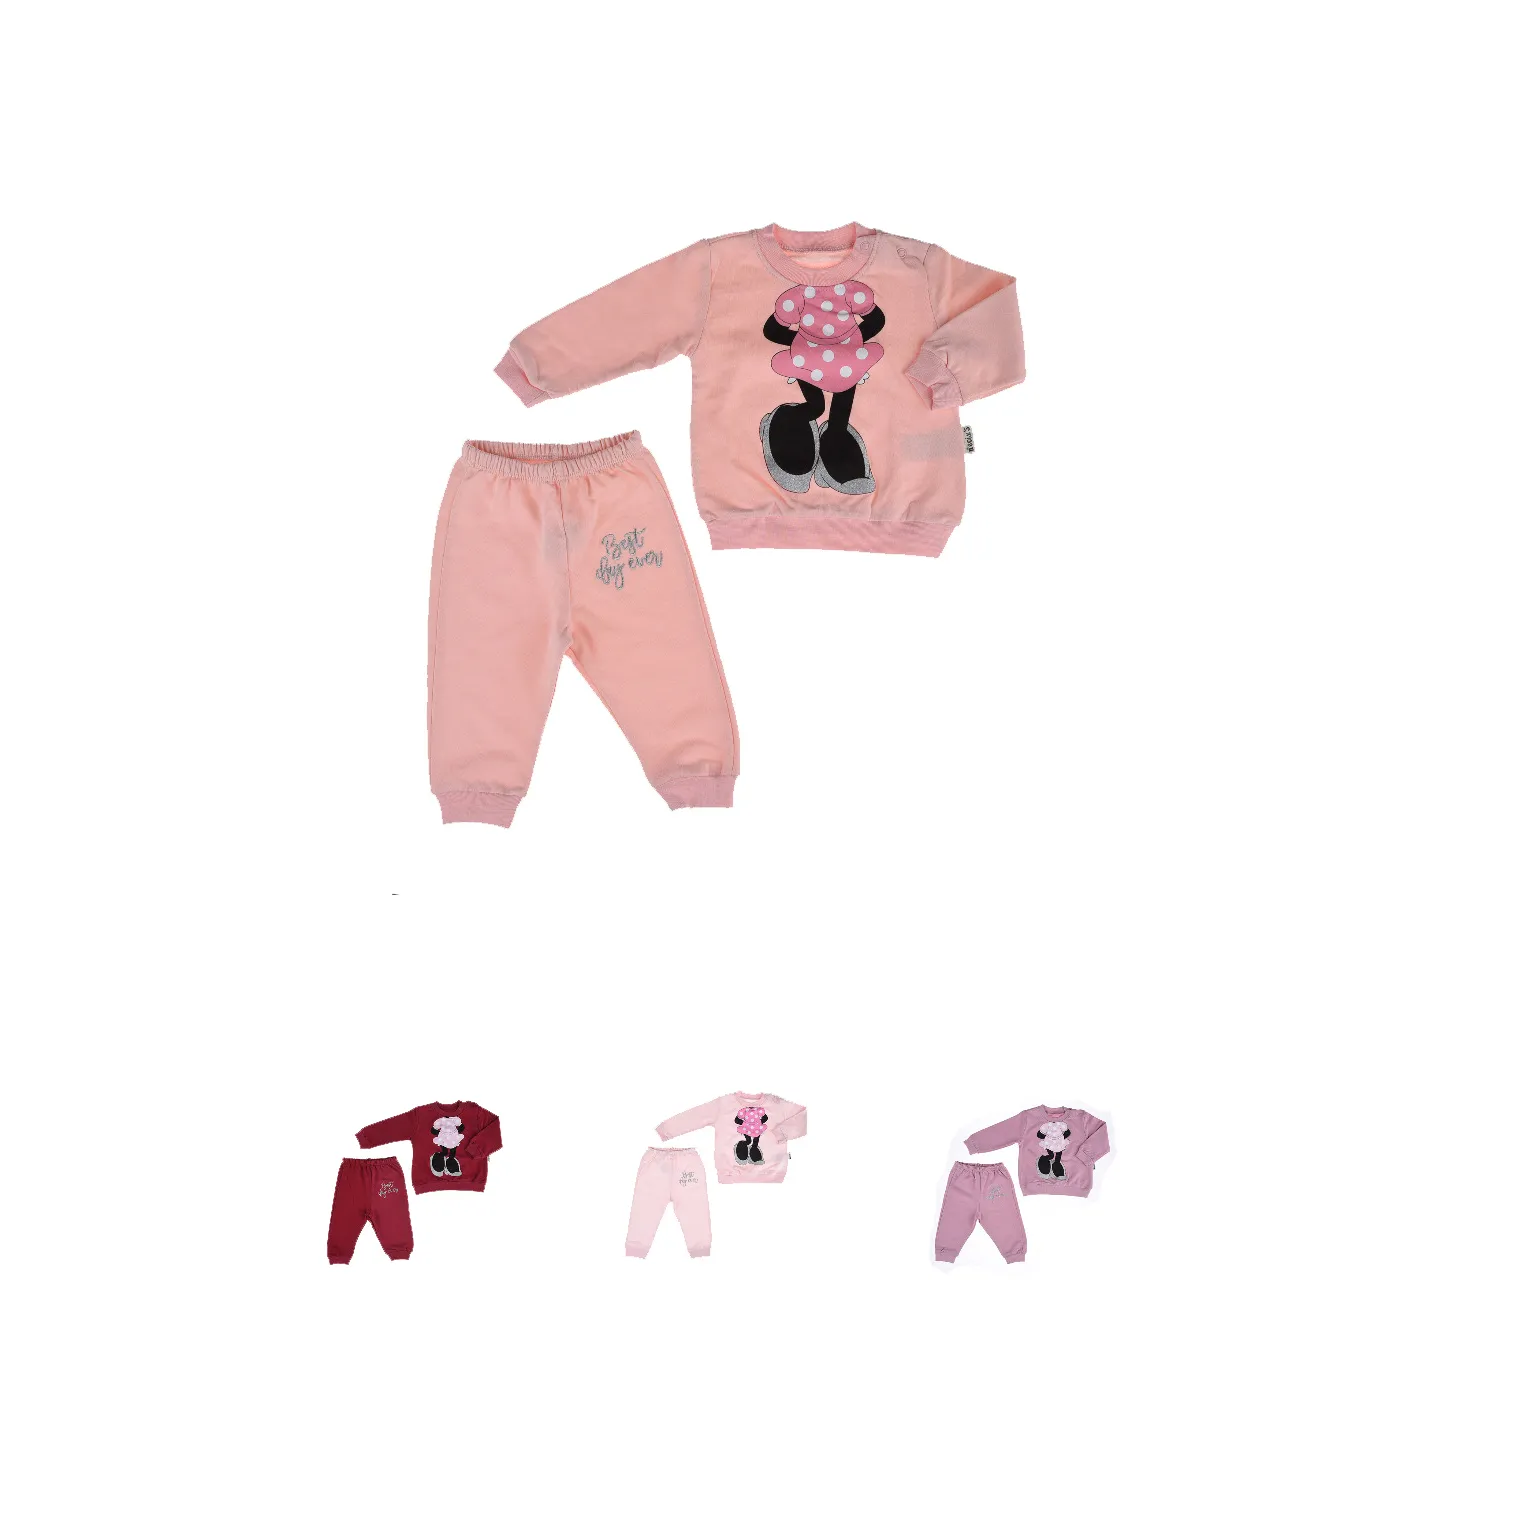 Hot Sale ! Minnie Best Day 2 Pcs Baby Girls' Clothing Sets Girl Soft Cotton Baby Clothes By Necix's Brand